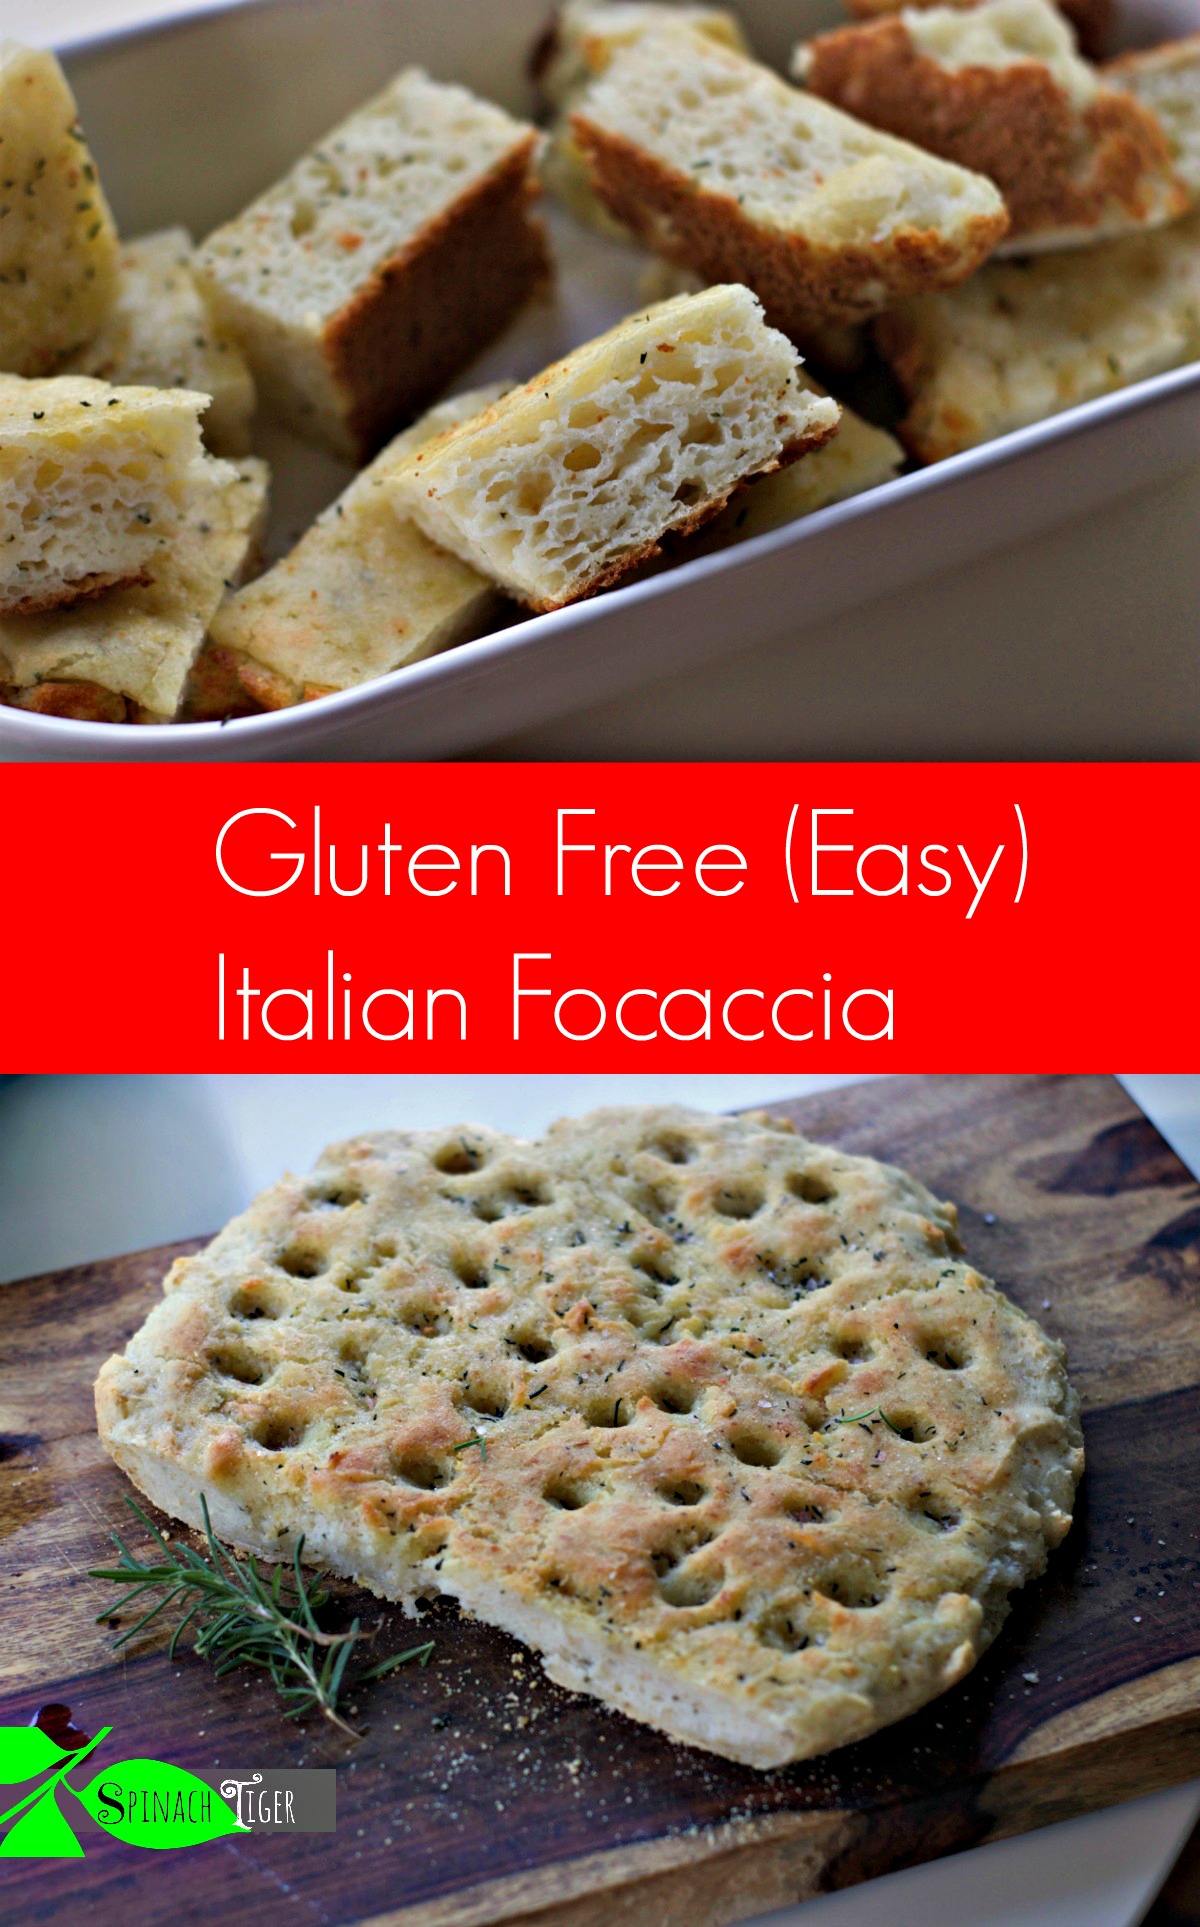 How to Make gluten free focaccia from Spinach Tiger